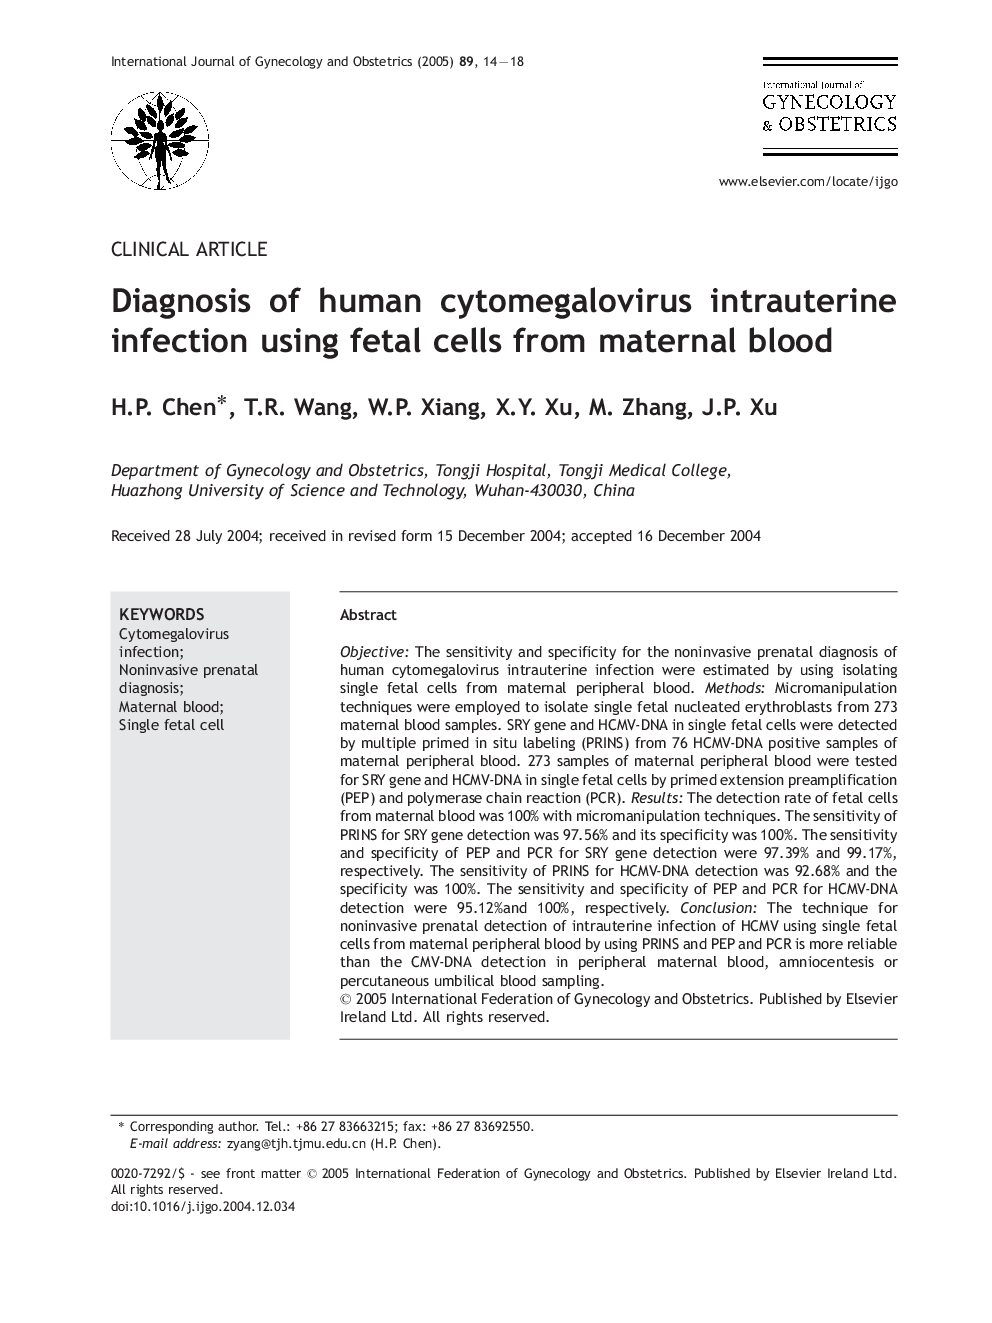 Diagnosis of human cytomegalovirus intrauterine infection using fetal cells from maternal blood